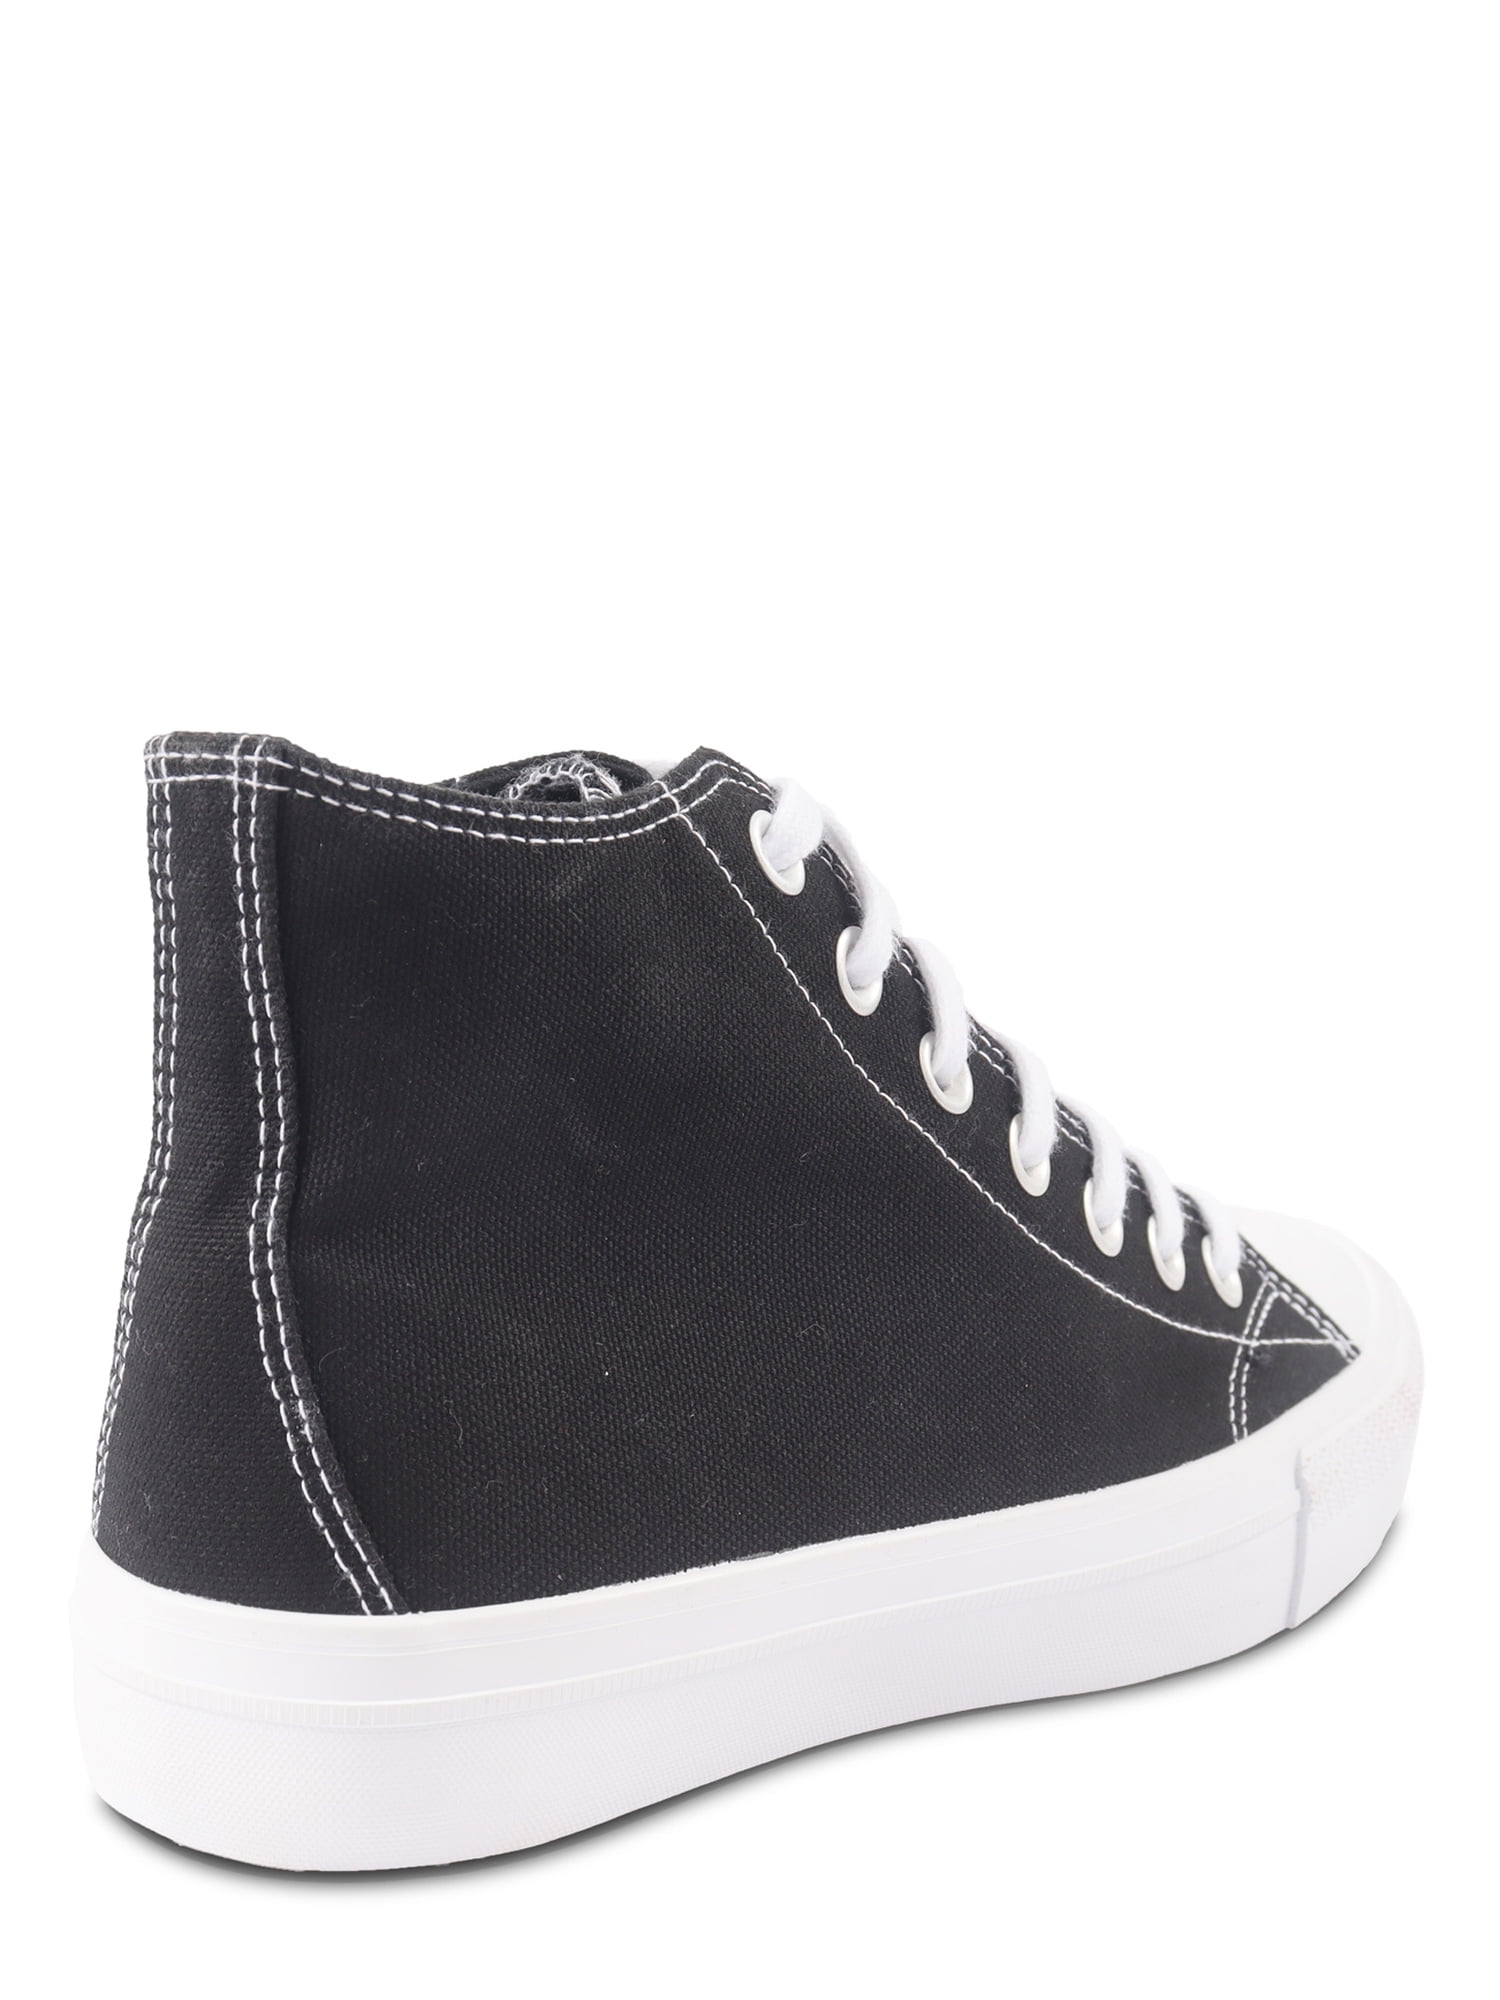 Mens White High Cut Shoes, Packaging Type: Box, Size: 6-10